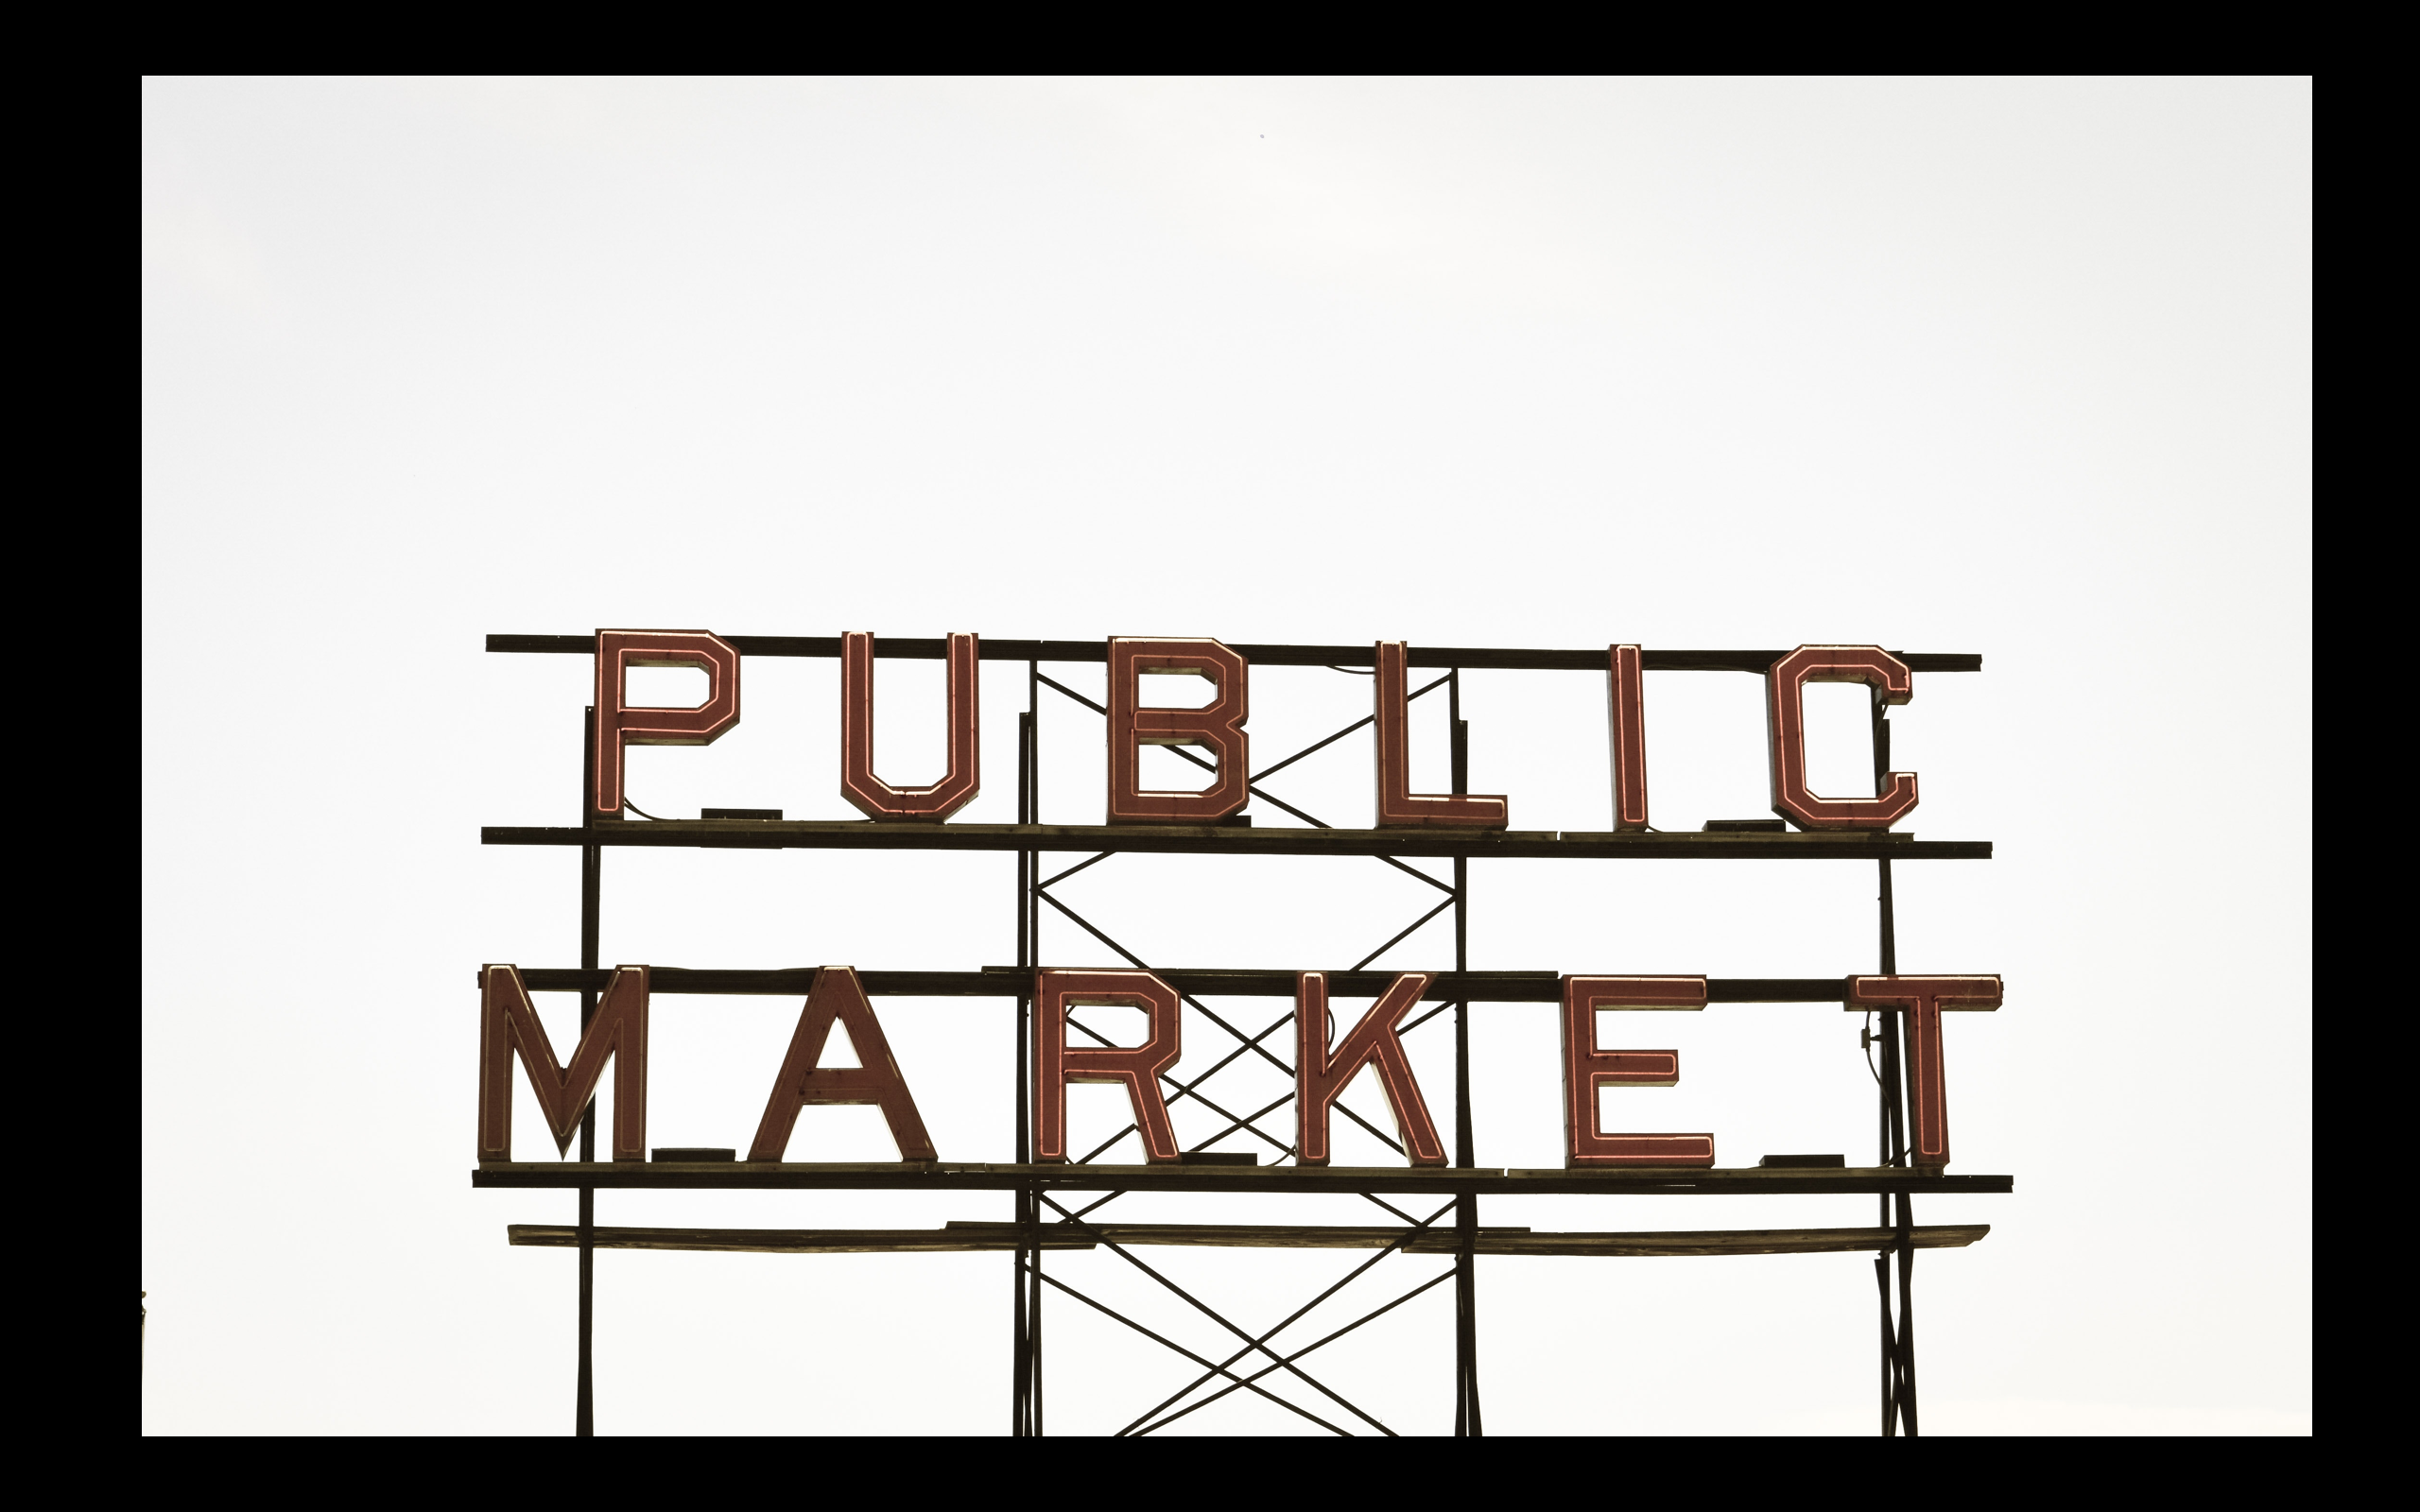 a photo of a sign that says "Public Market"